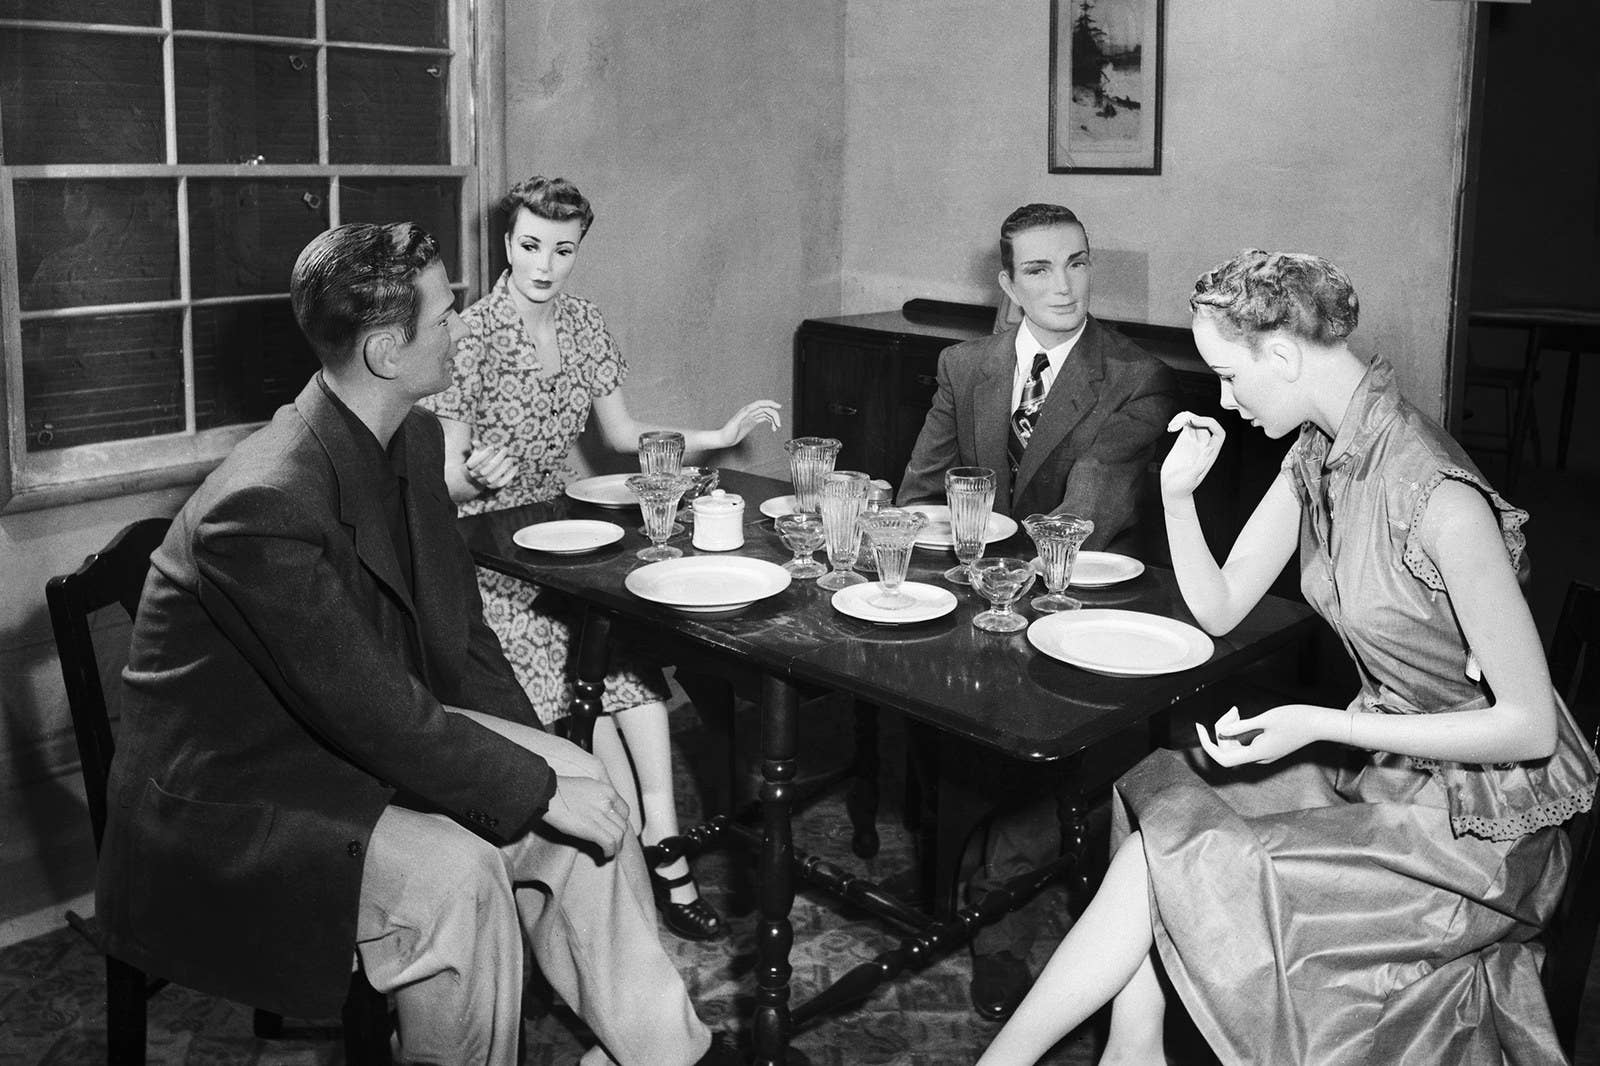 Plastic dummies are arranged by the US government in a casual dinner scene in an average American home located almost two miles from where an atomic bomb was scheduled to explode on March 17, 1953.